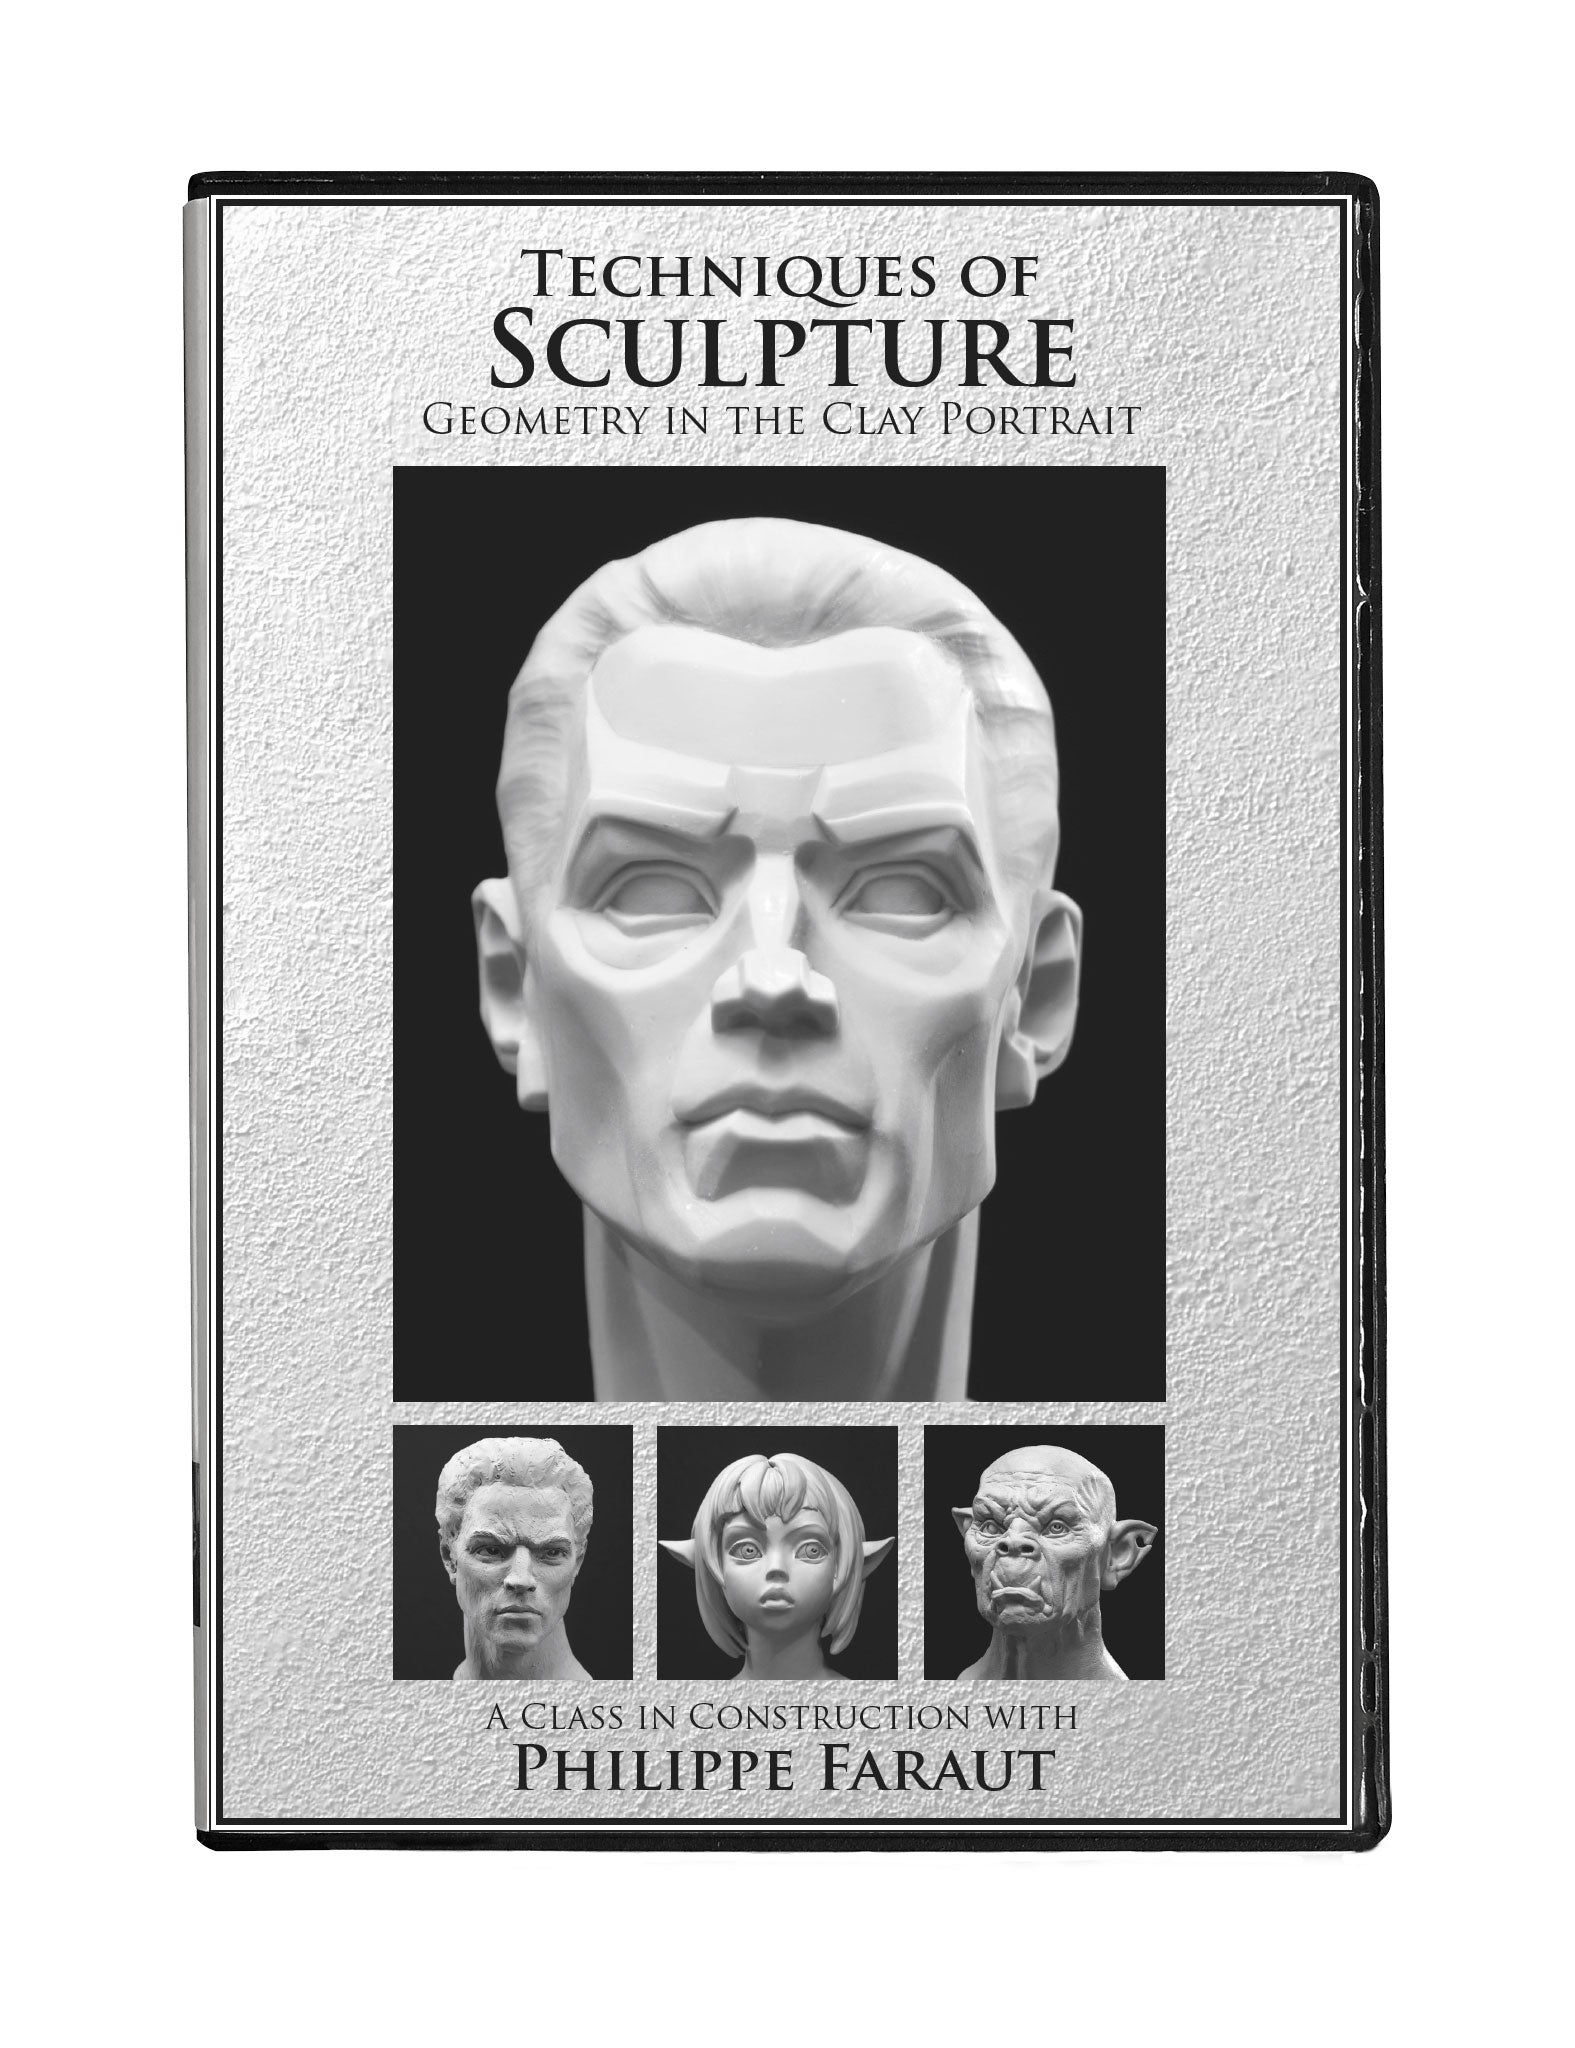 DVD techniques of sculpture Philippe Faraut volume 1 geometry of the face